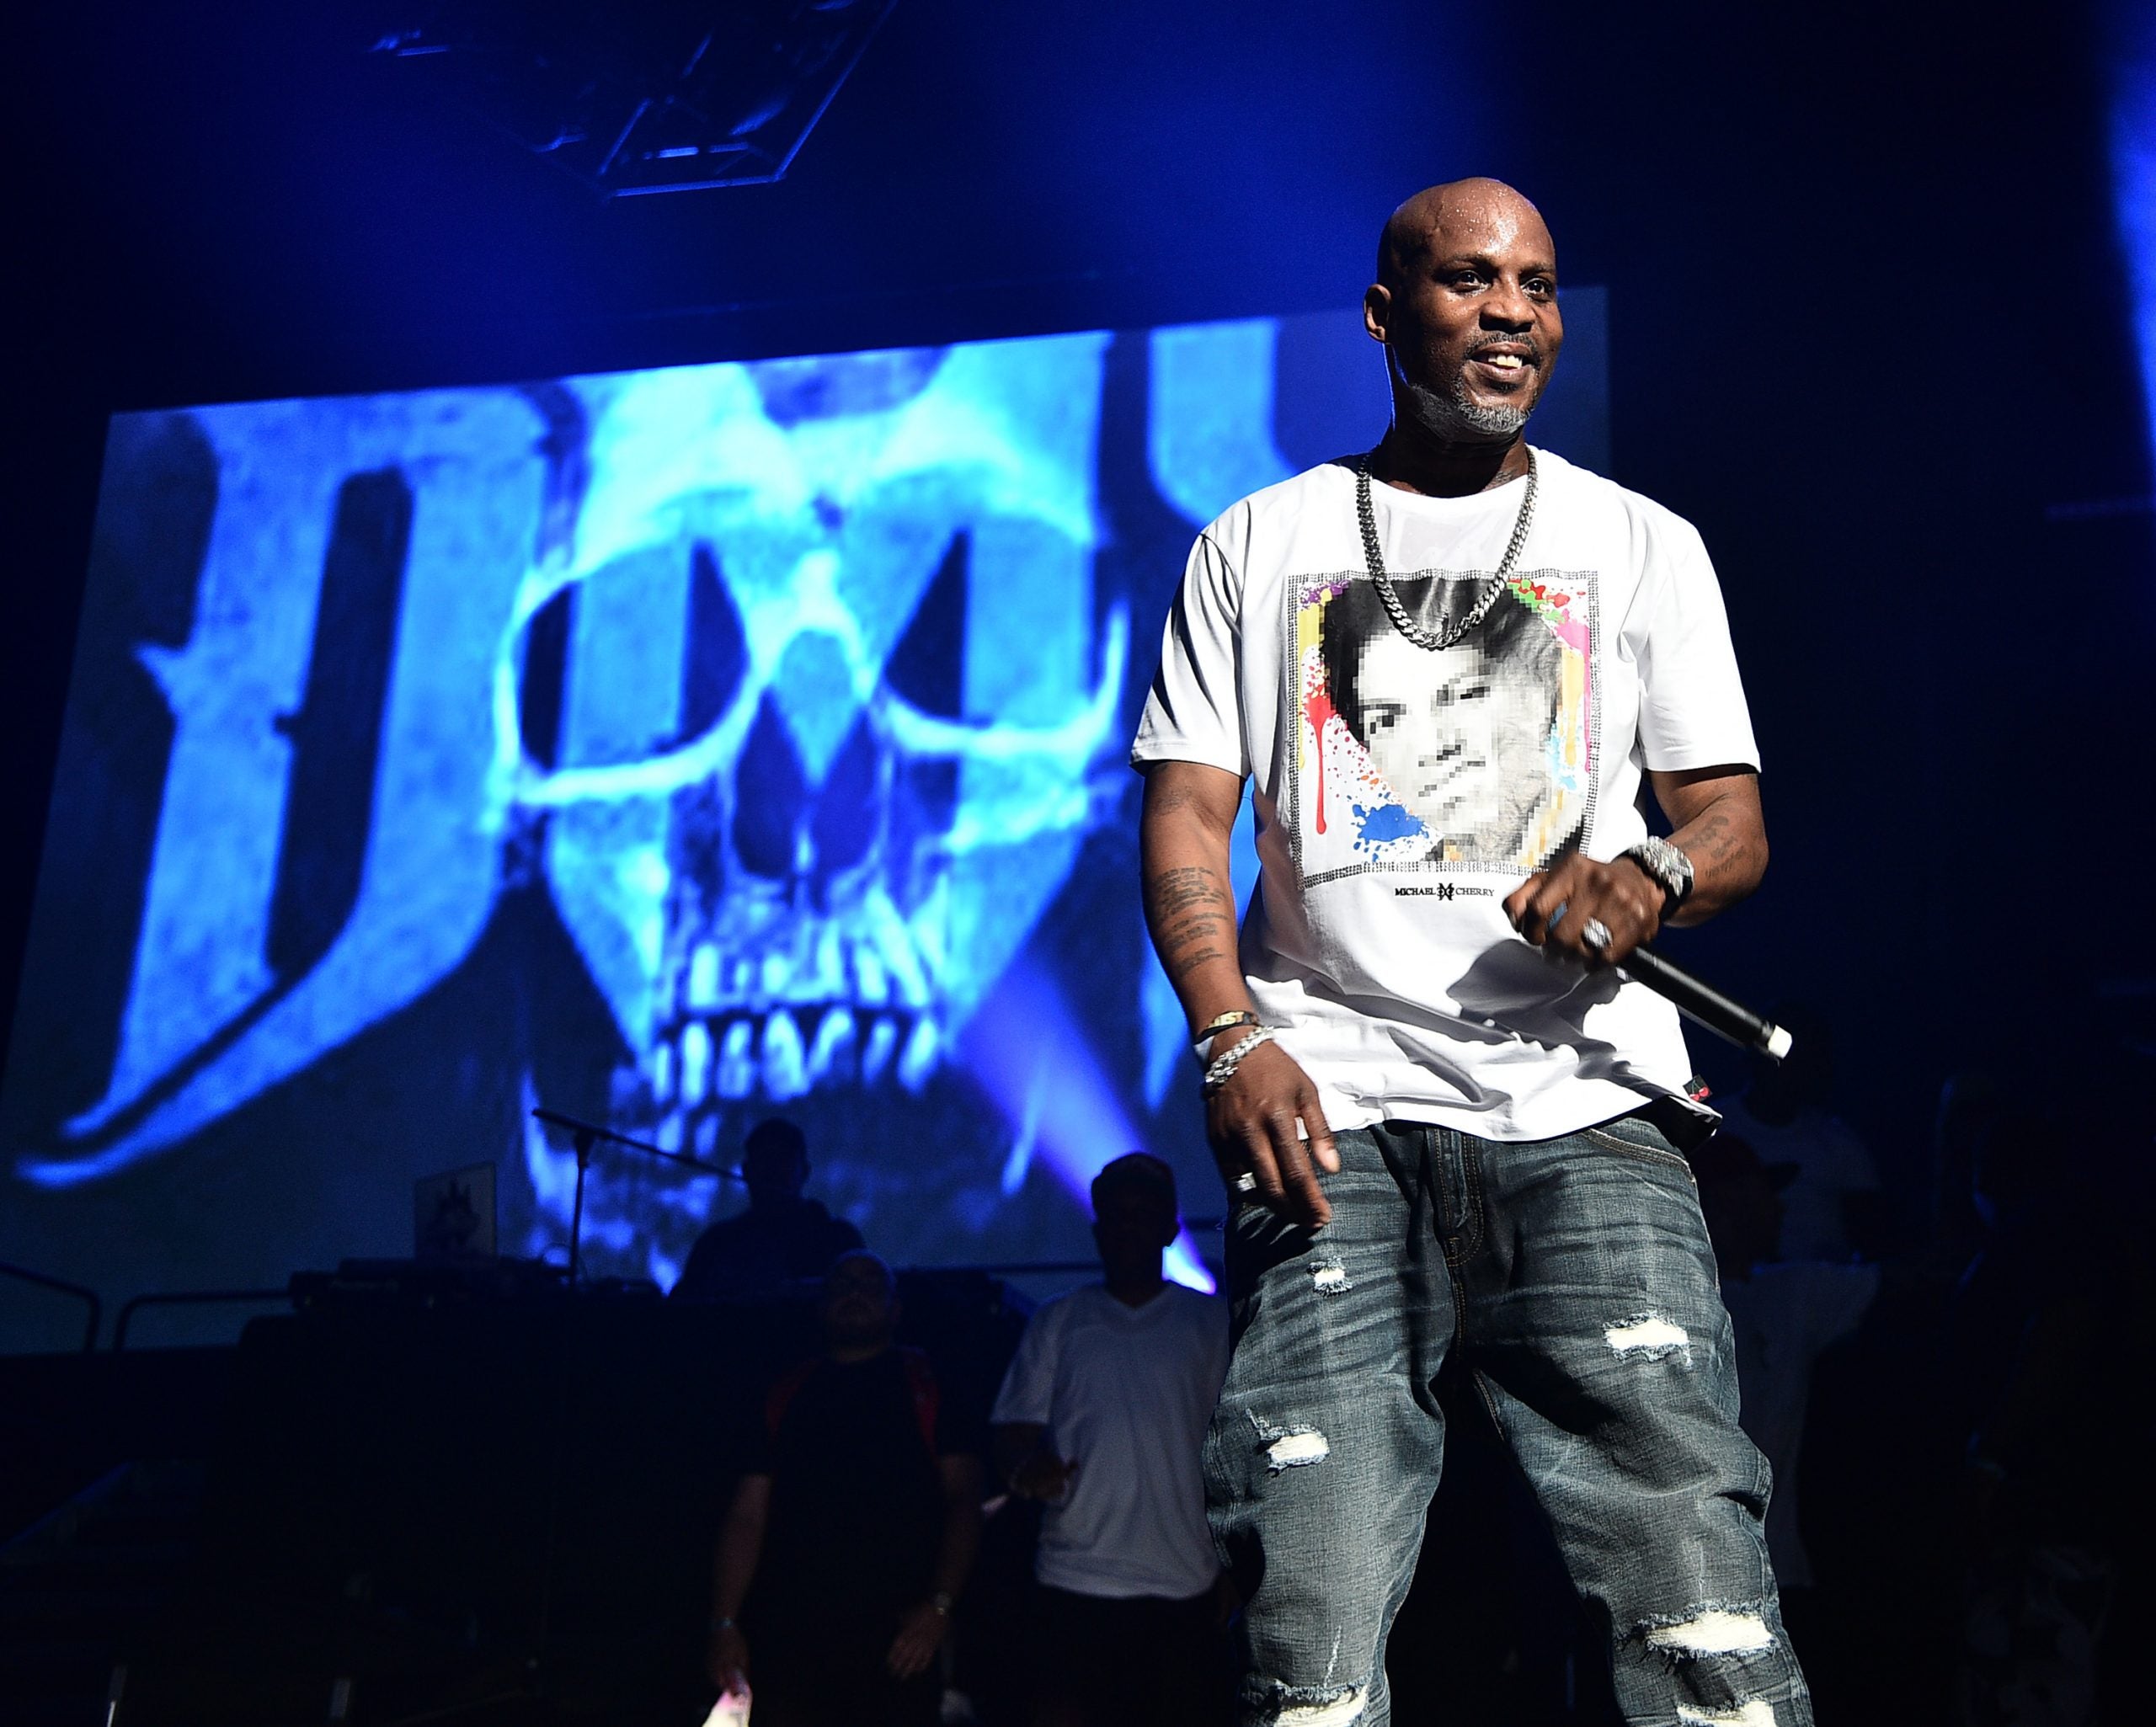 Fan Shares How DMX Inspired Her To Forgive Her Father Who Died of Addiction